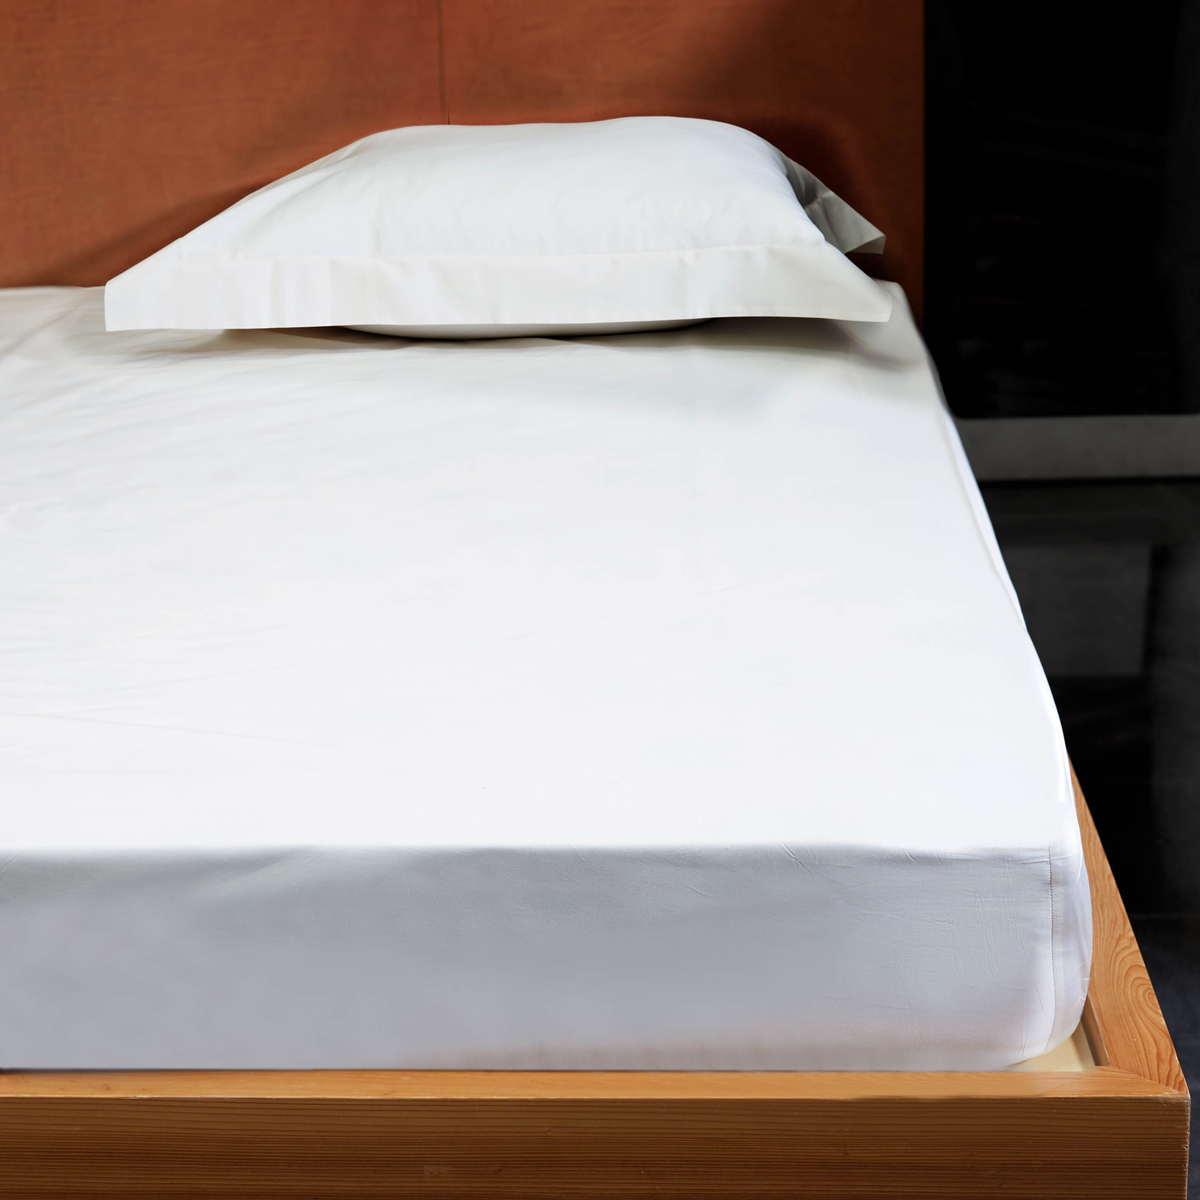 Fitted Sheet of Signoria Luce Bedding in White Color